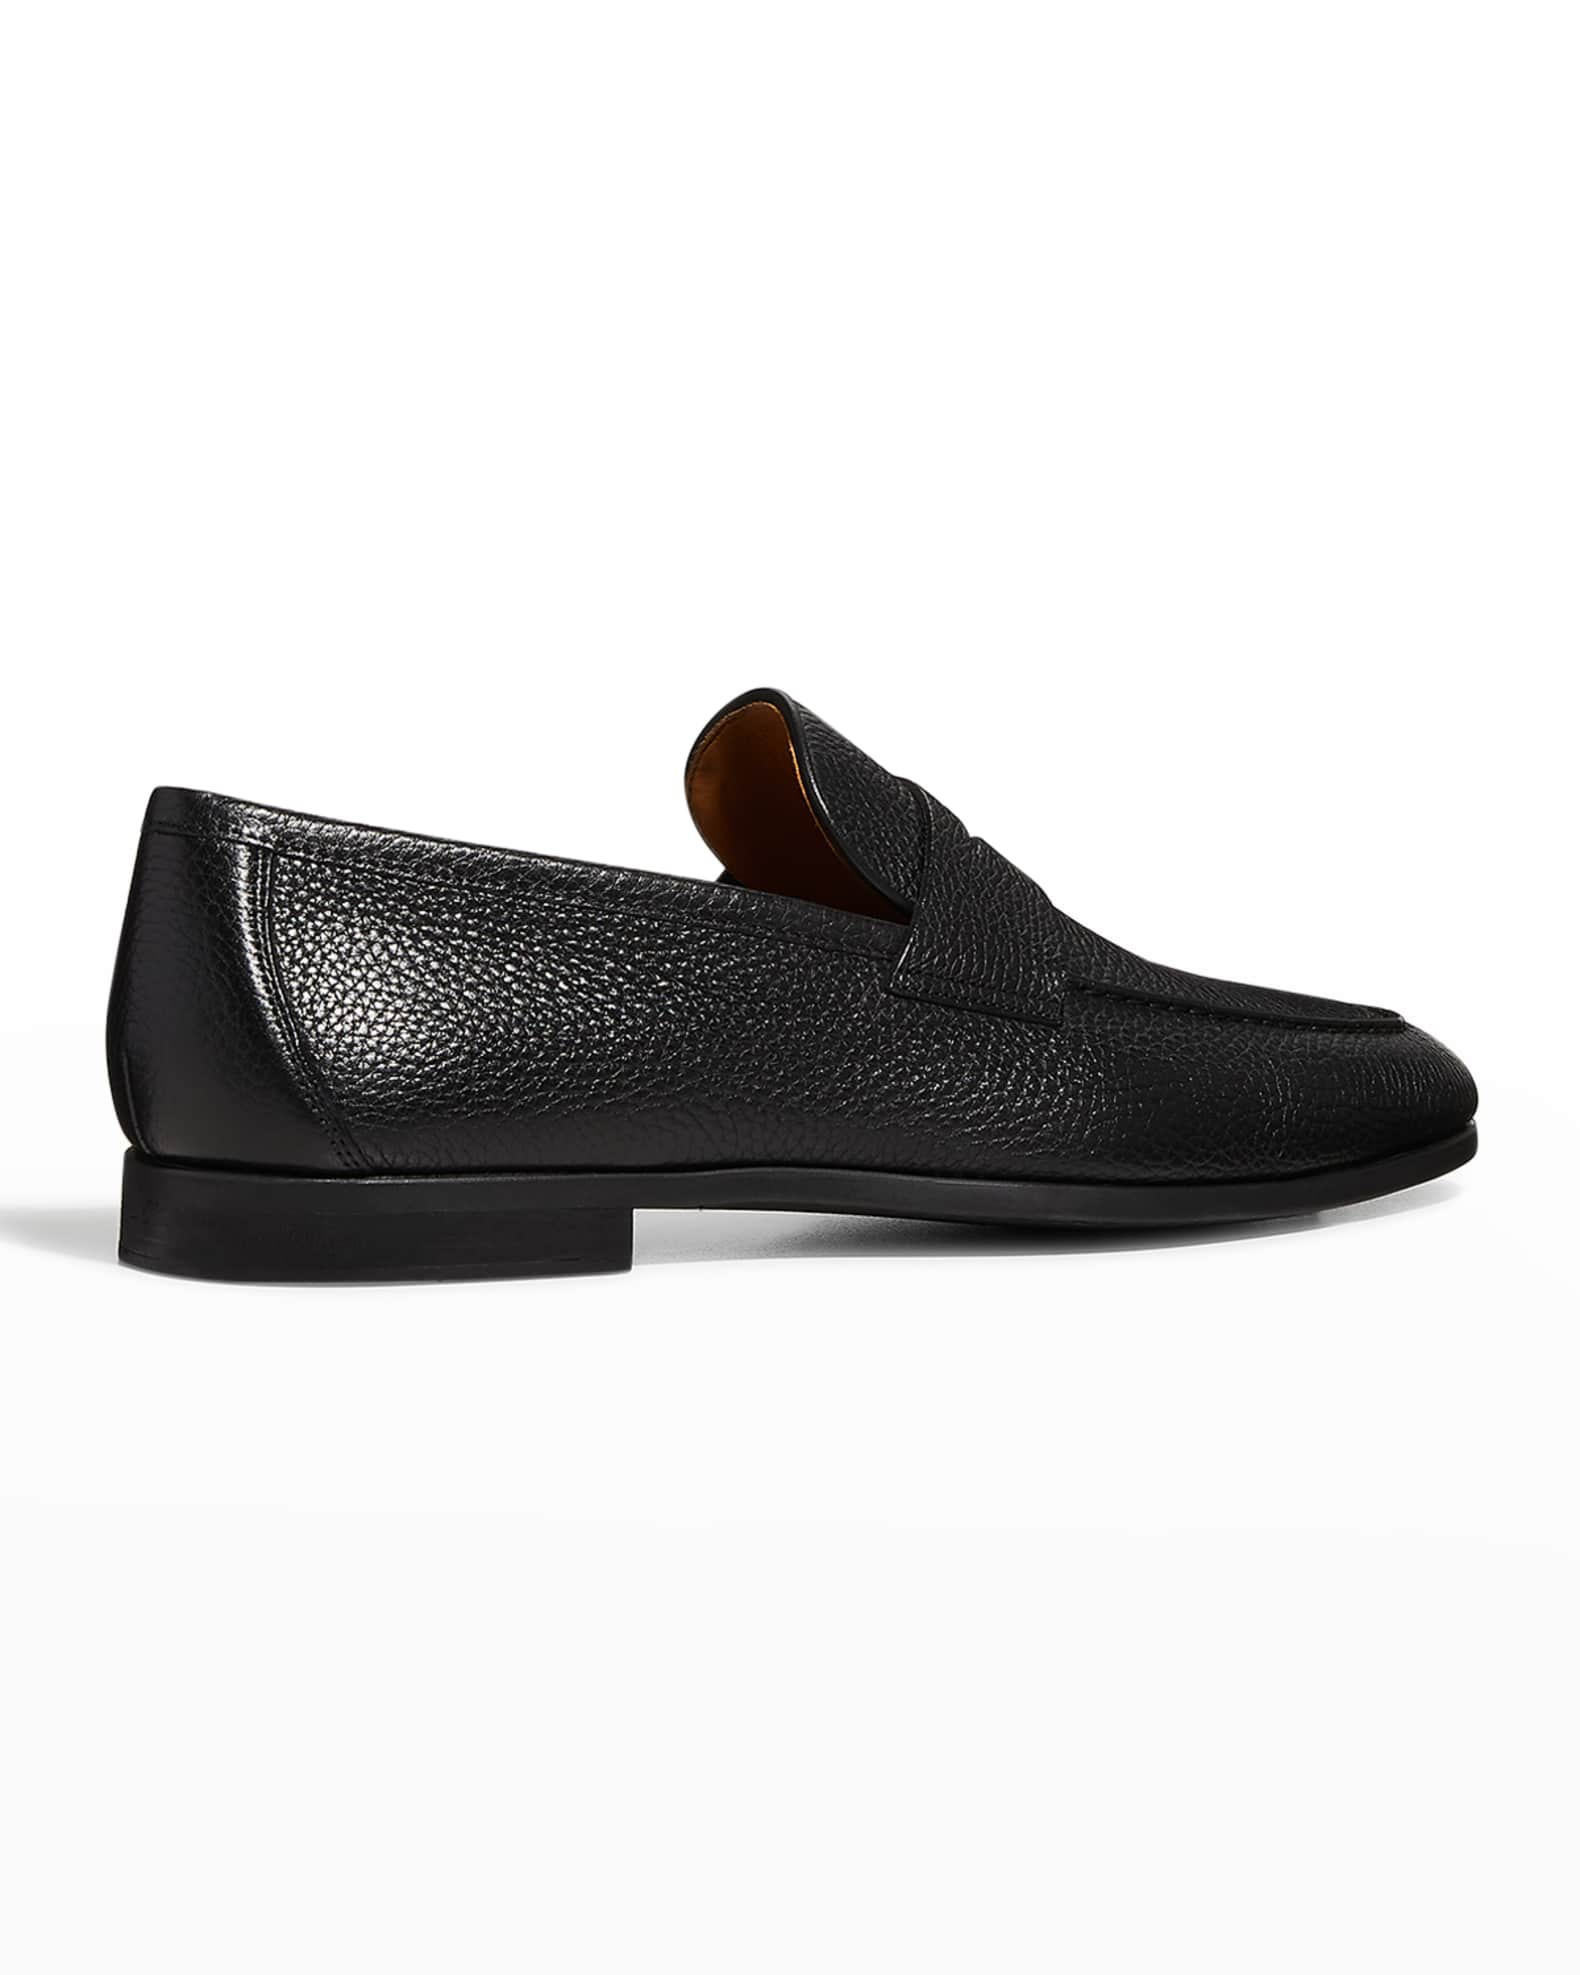 Magnanni Men's Diezman II Leather Penny Loafers | Neiman Marcus